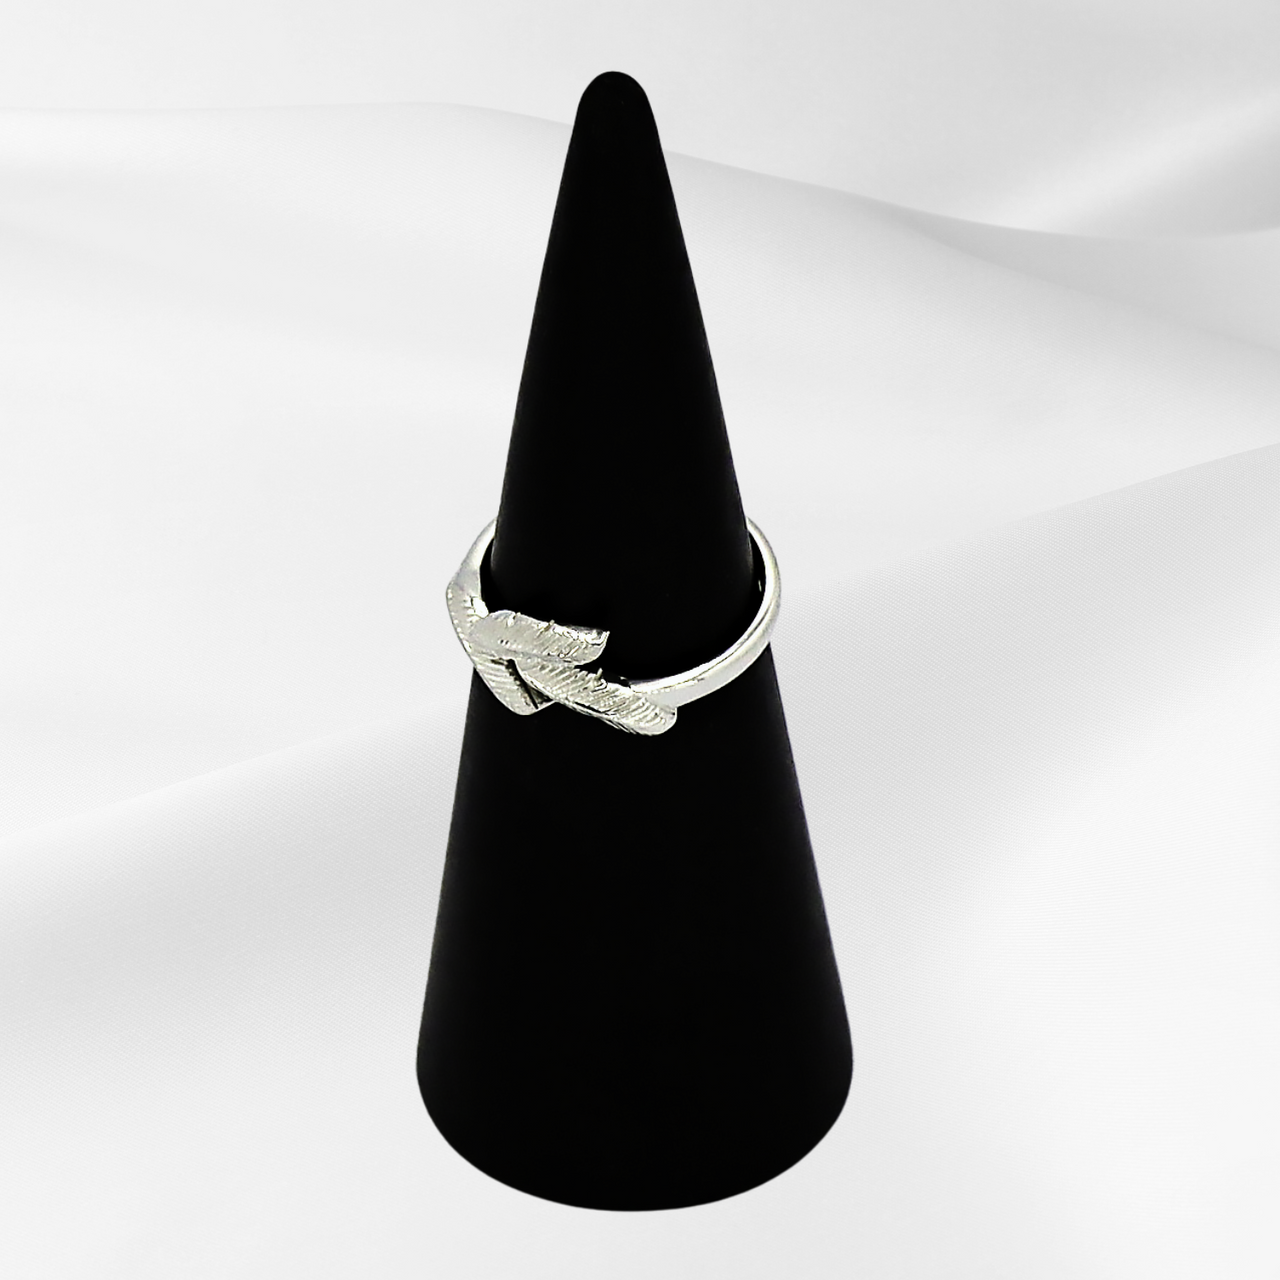 Soar with Joy™ Ladies Ring in Sterling Silver side-facing view on ring holder